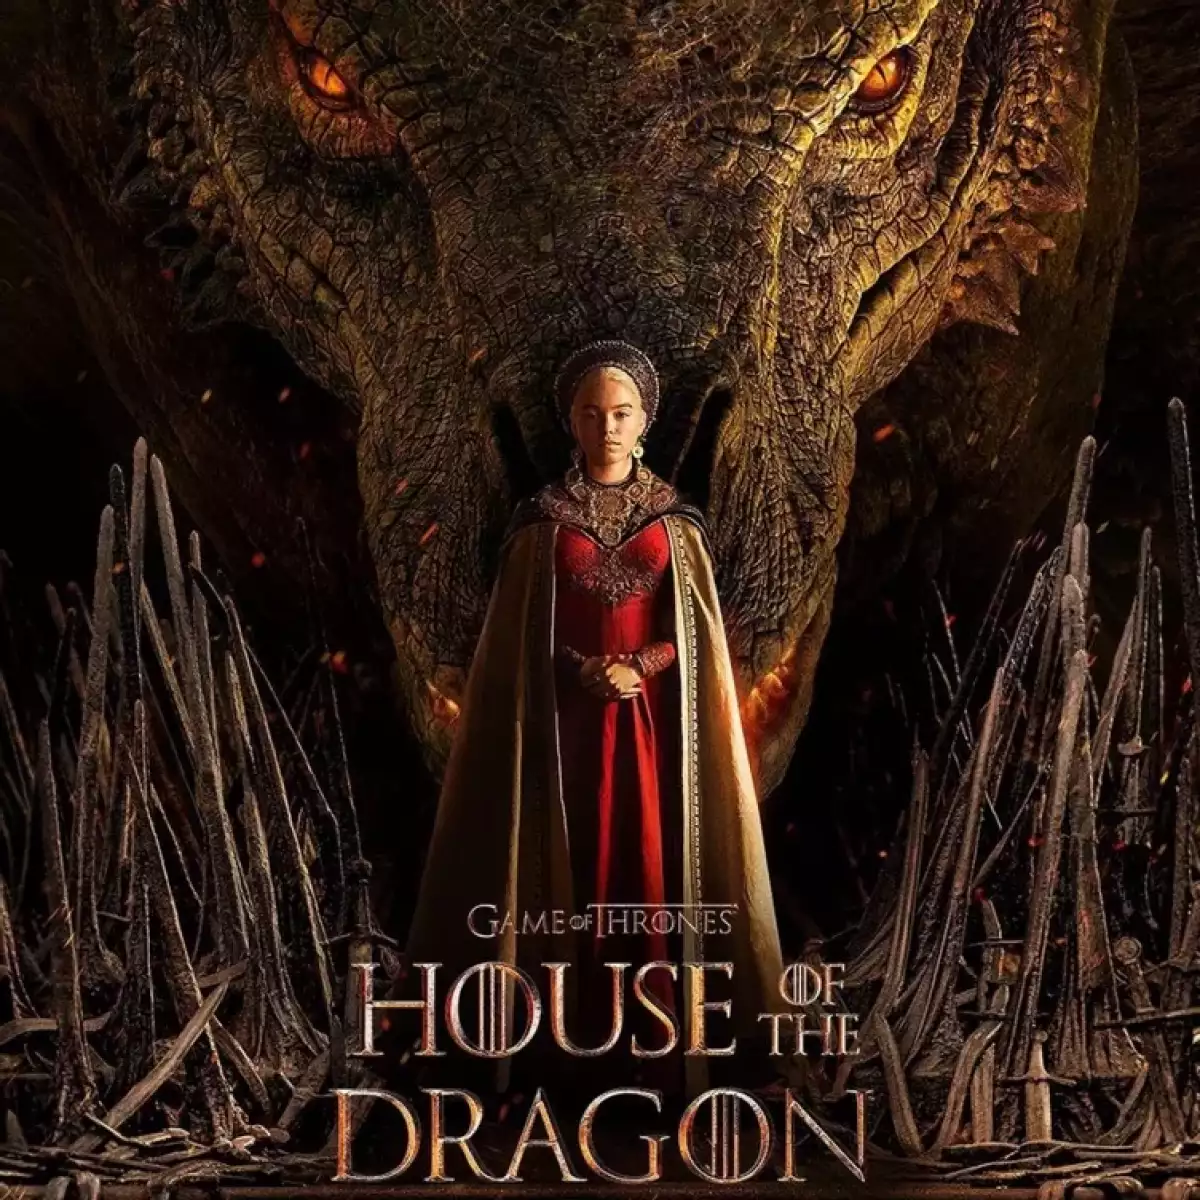 House of the Dragon Quiz